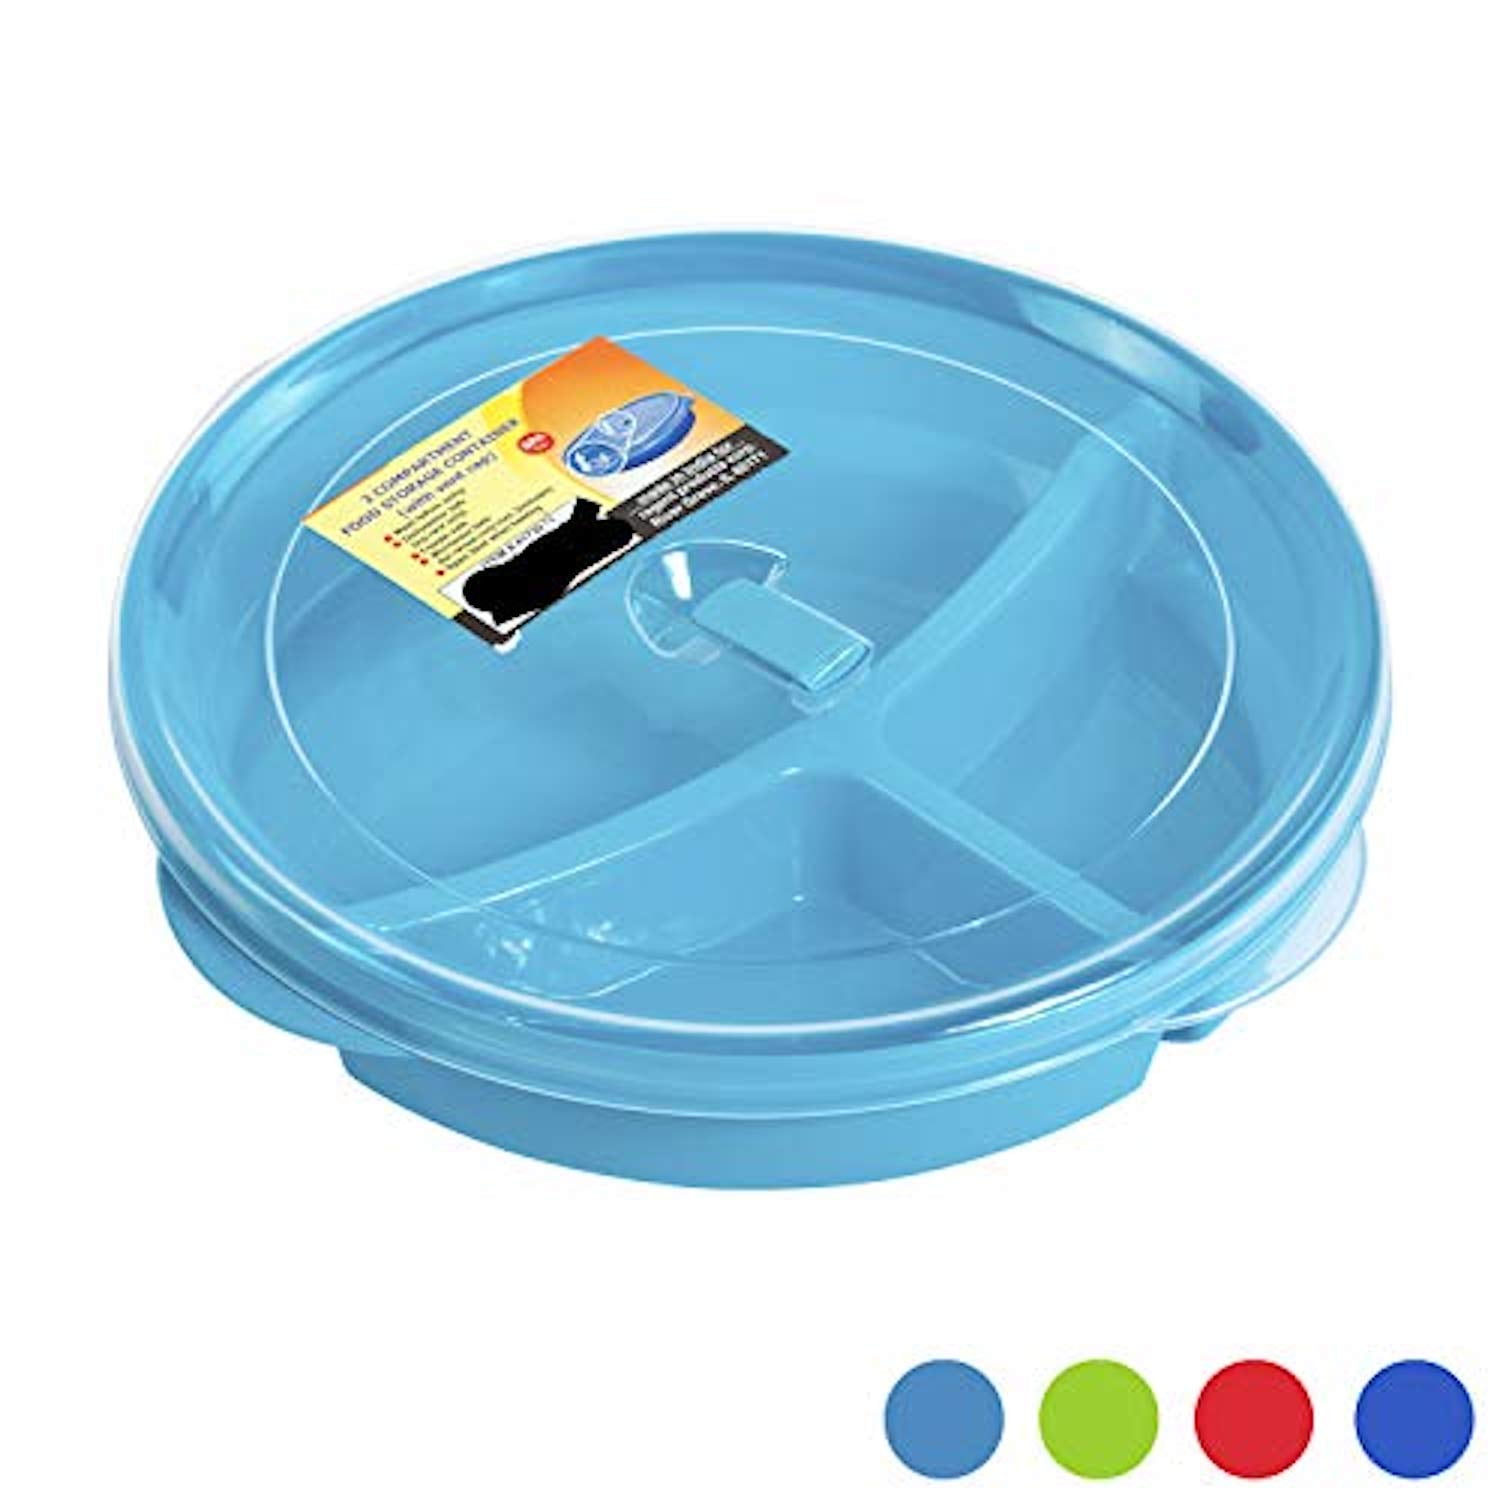 Krumbs Kitchen Essentials Silicone Lunch Container – Outlet Express